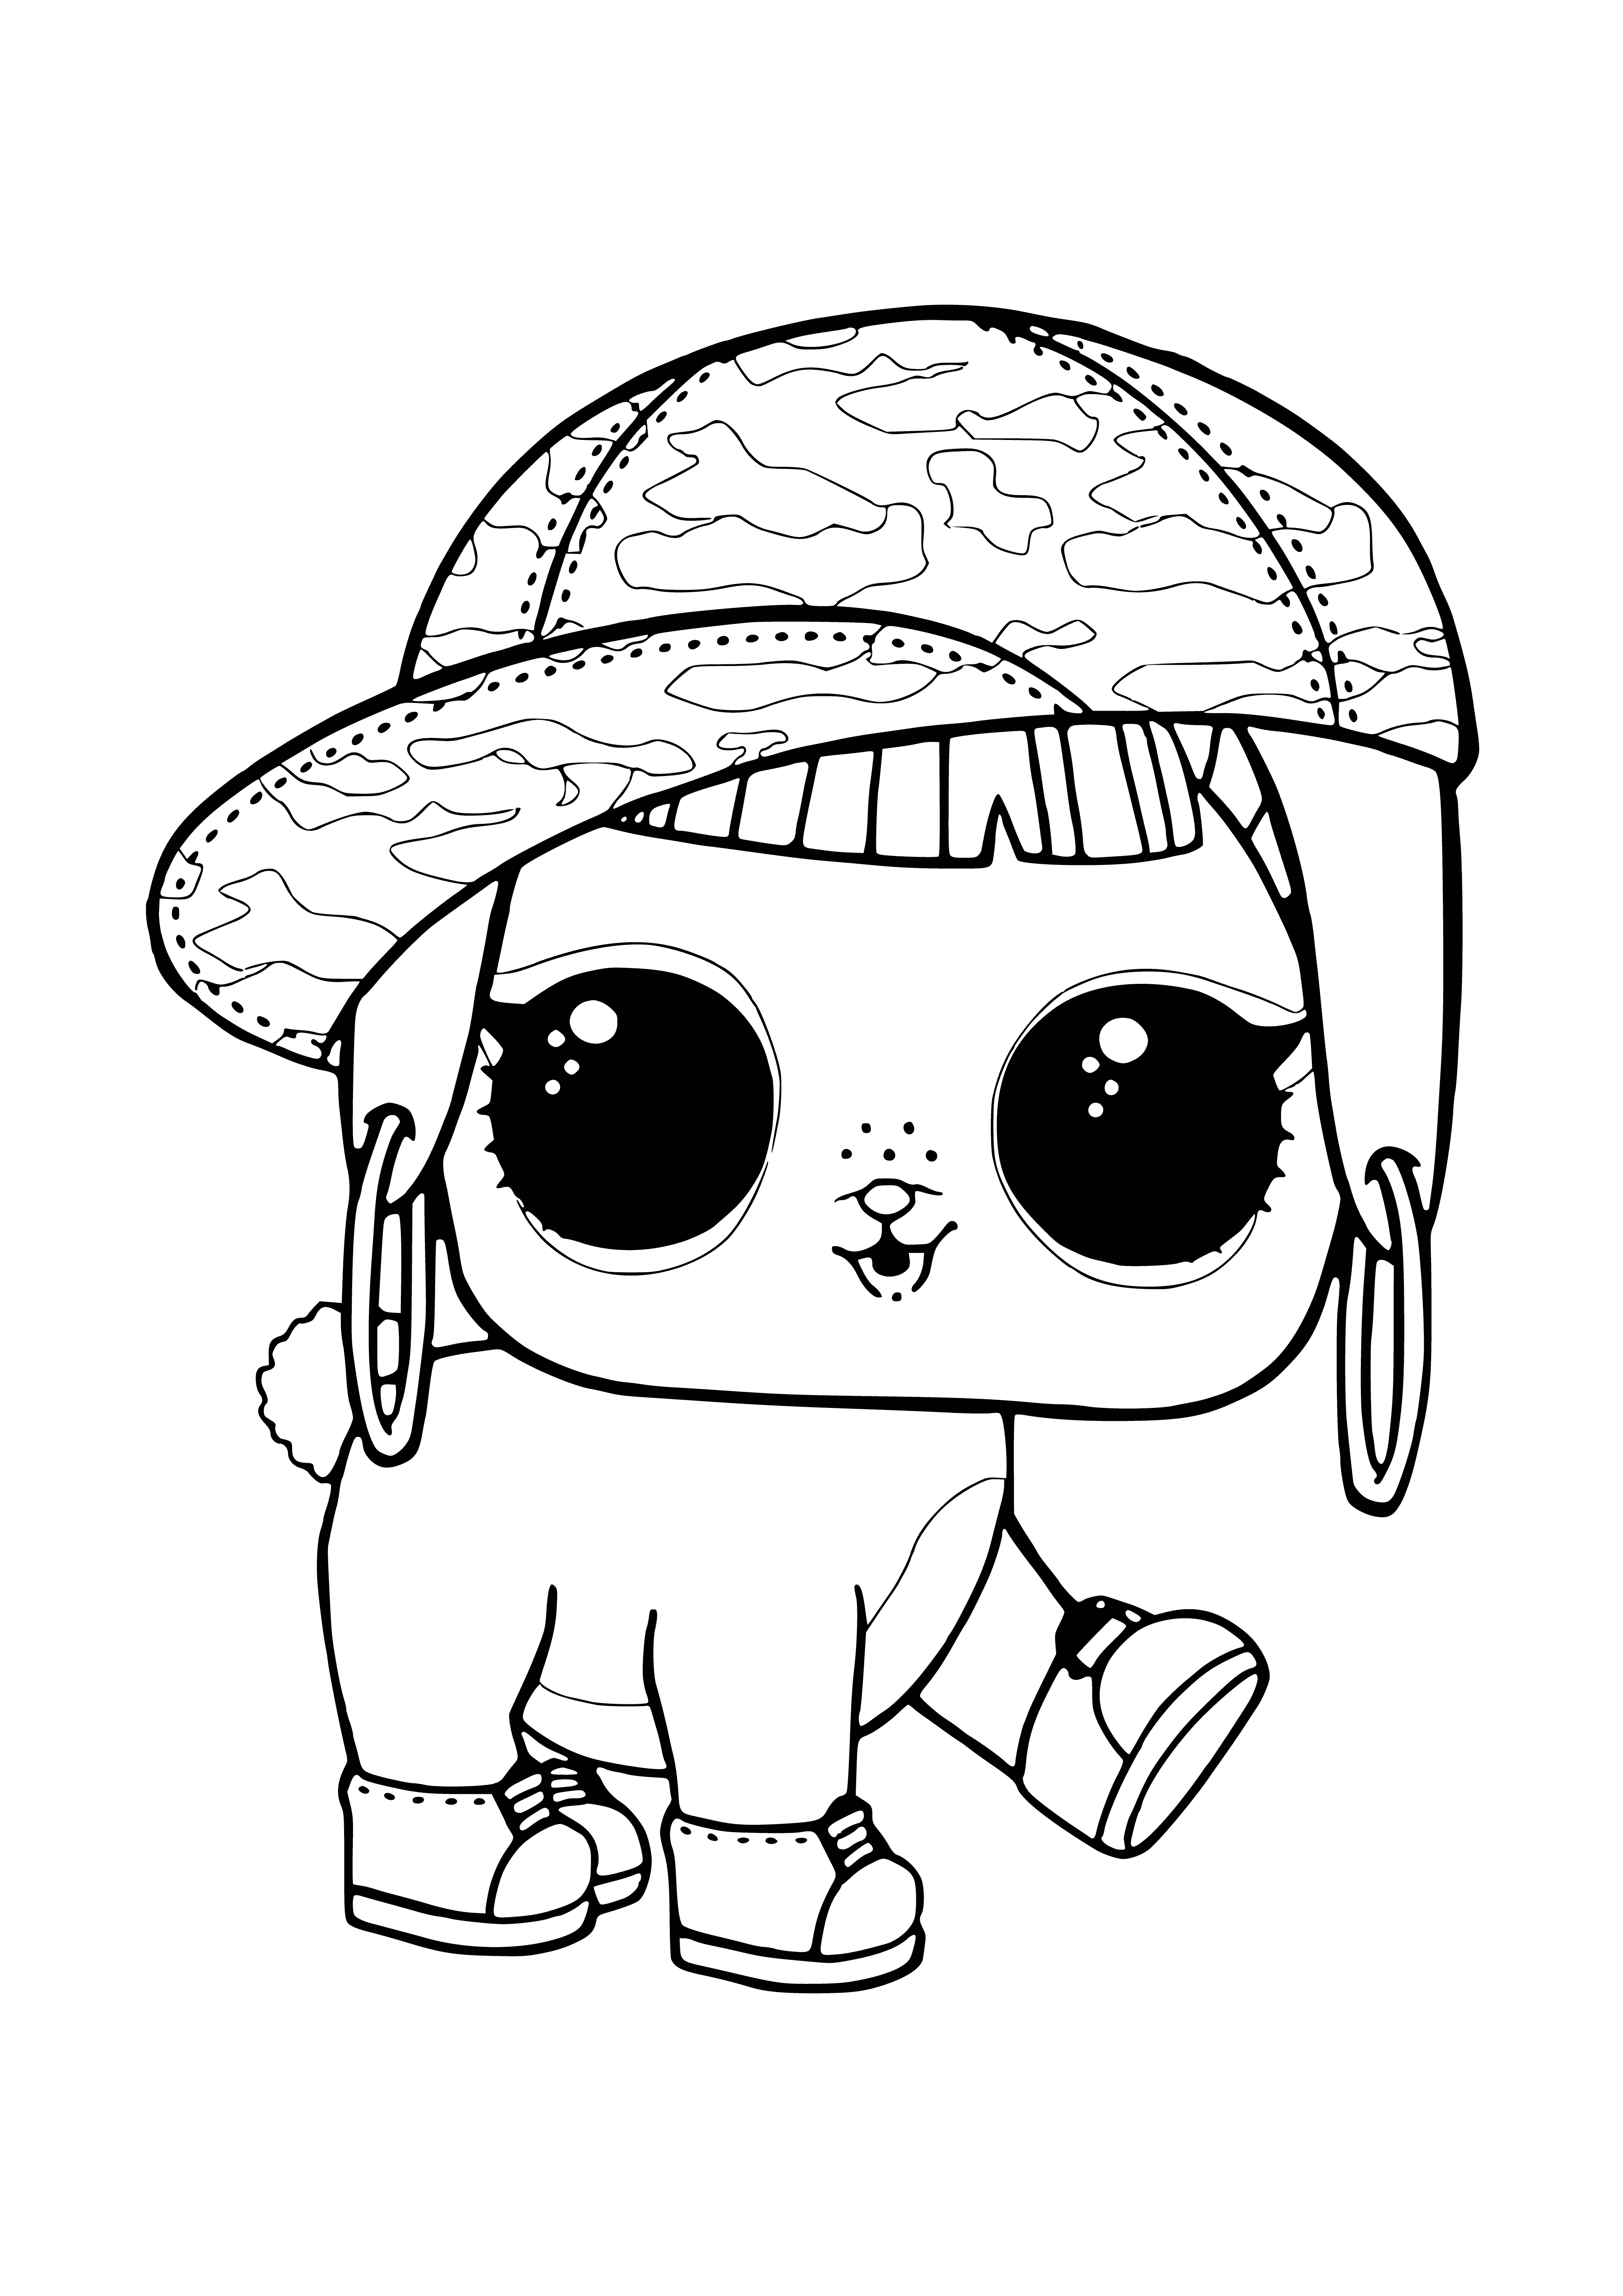 coloring page: Cute pet bunny-rapper raps with black & white spots, carrot & striped shirt & backpack. #RappingBunny